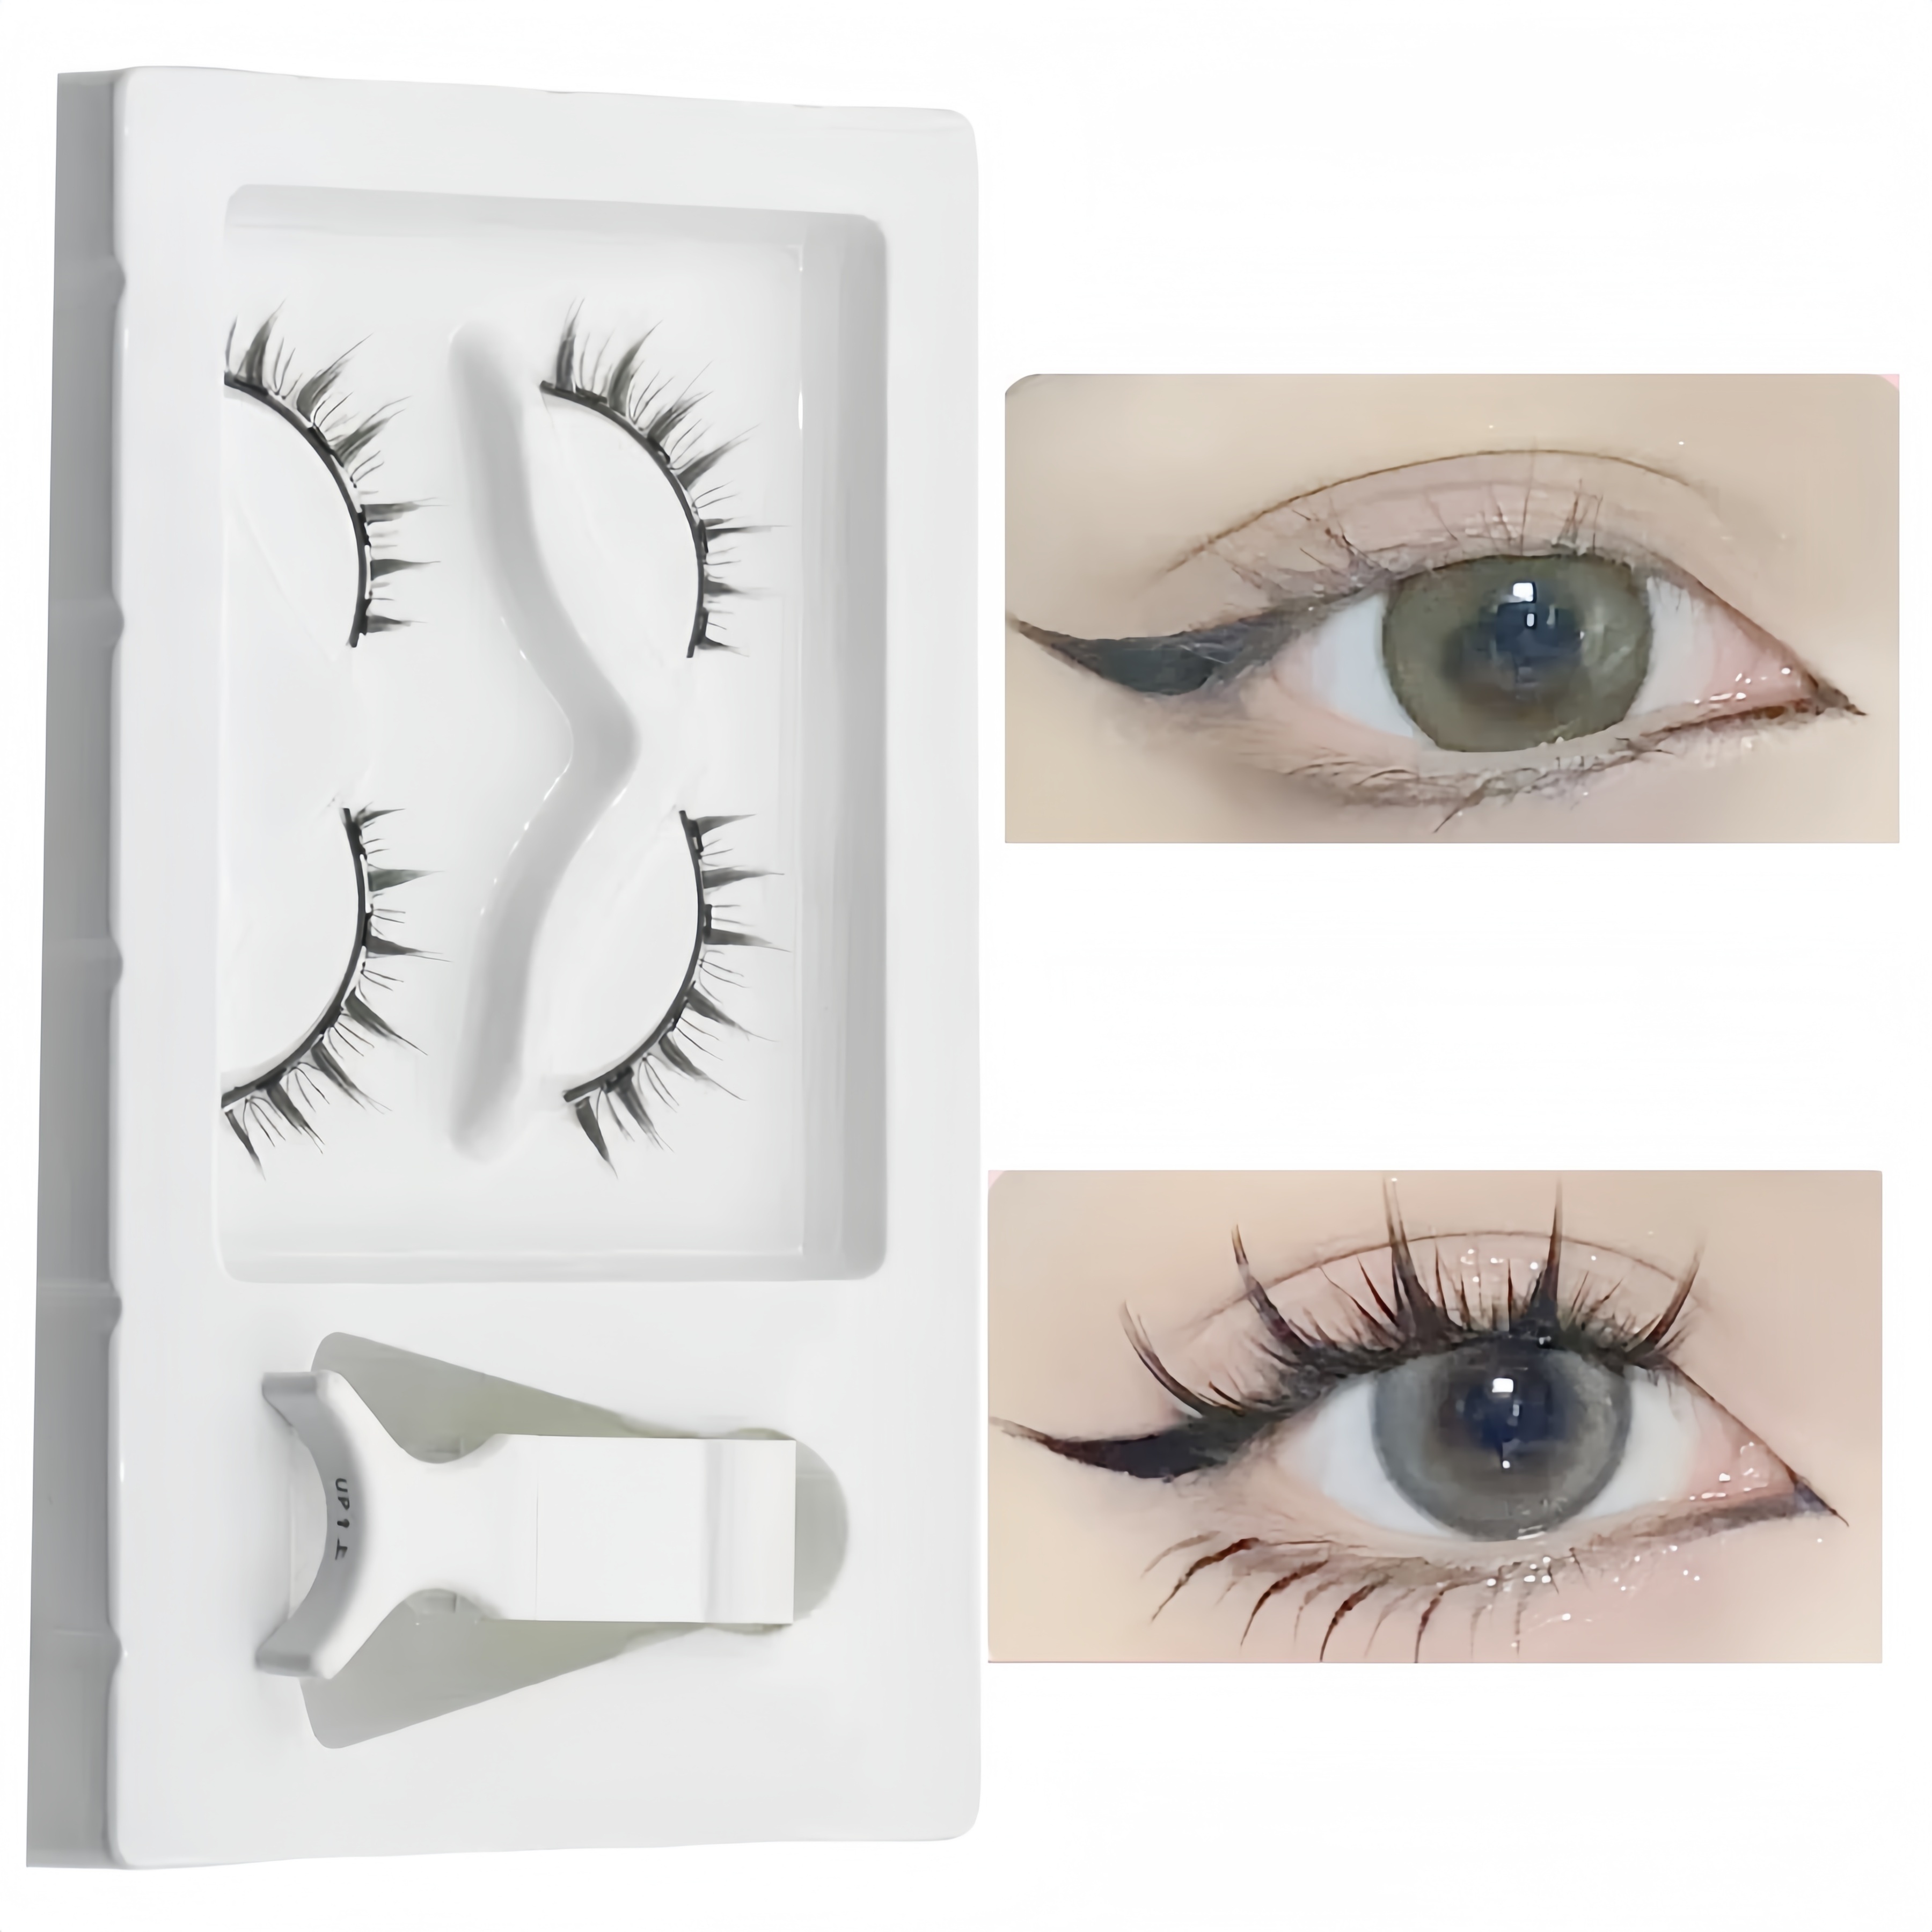 

Magnetic Cat Eye False Eyelashes Kit With Tweezers - Reusable, Soft & Natural Look For Beginners, Doll-style 3d Effect, Easy To Apply